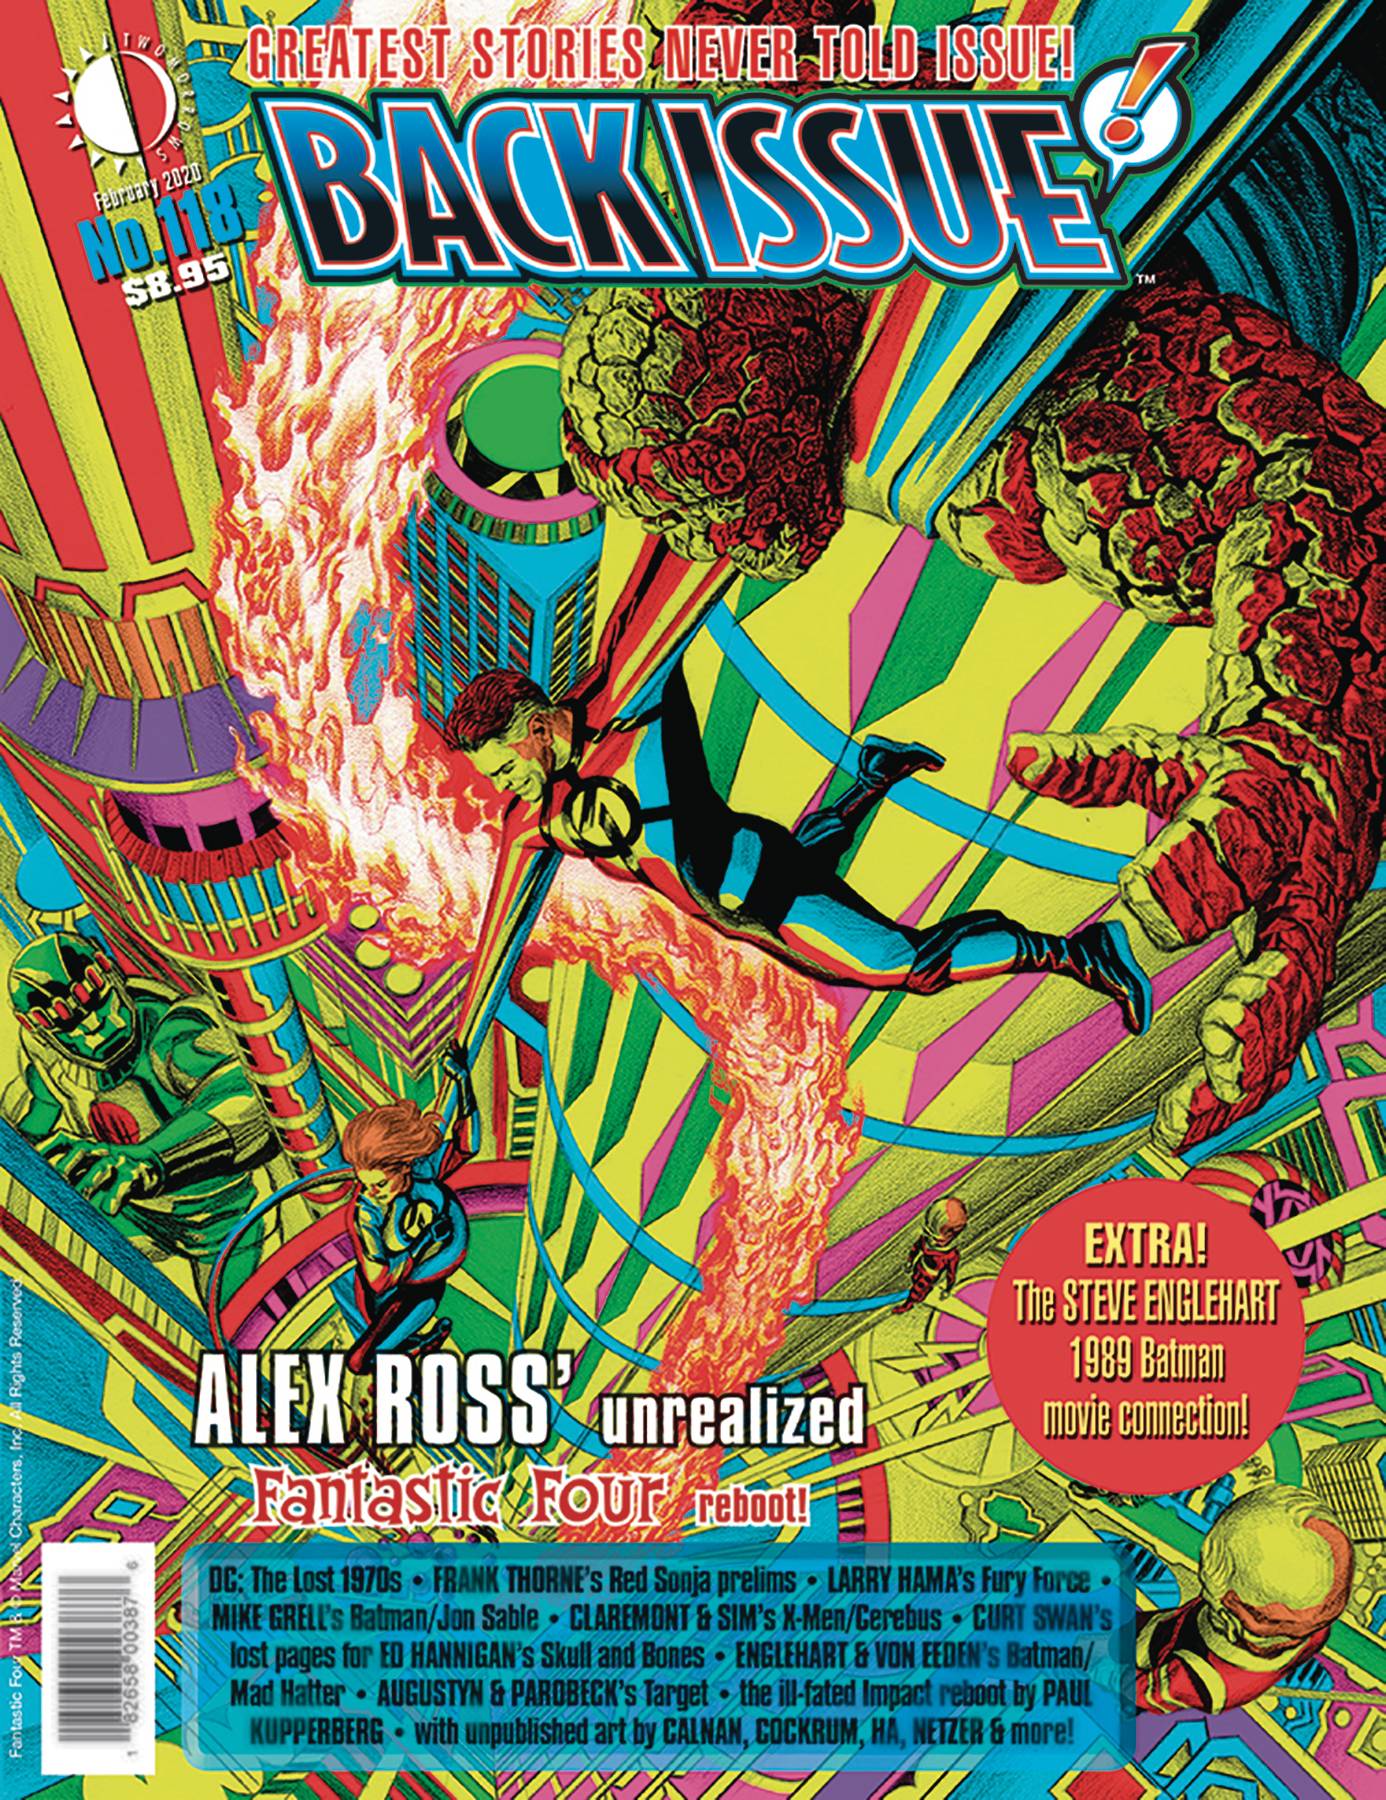 BACK ISSUE #118